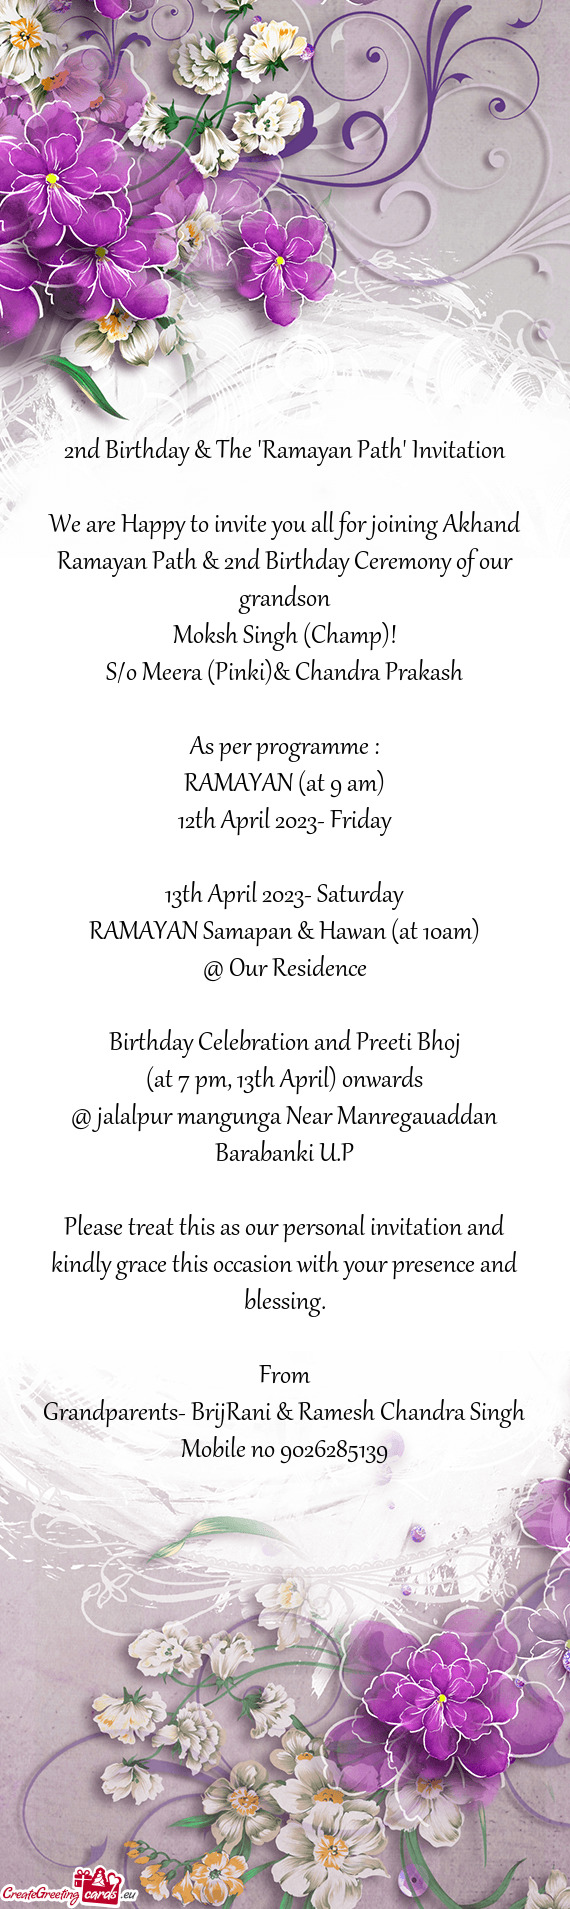 We are Happy to invite you all for joining Akhand Ramayan Path & 2nd Birthday Ceremony of our grands